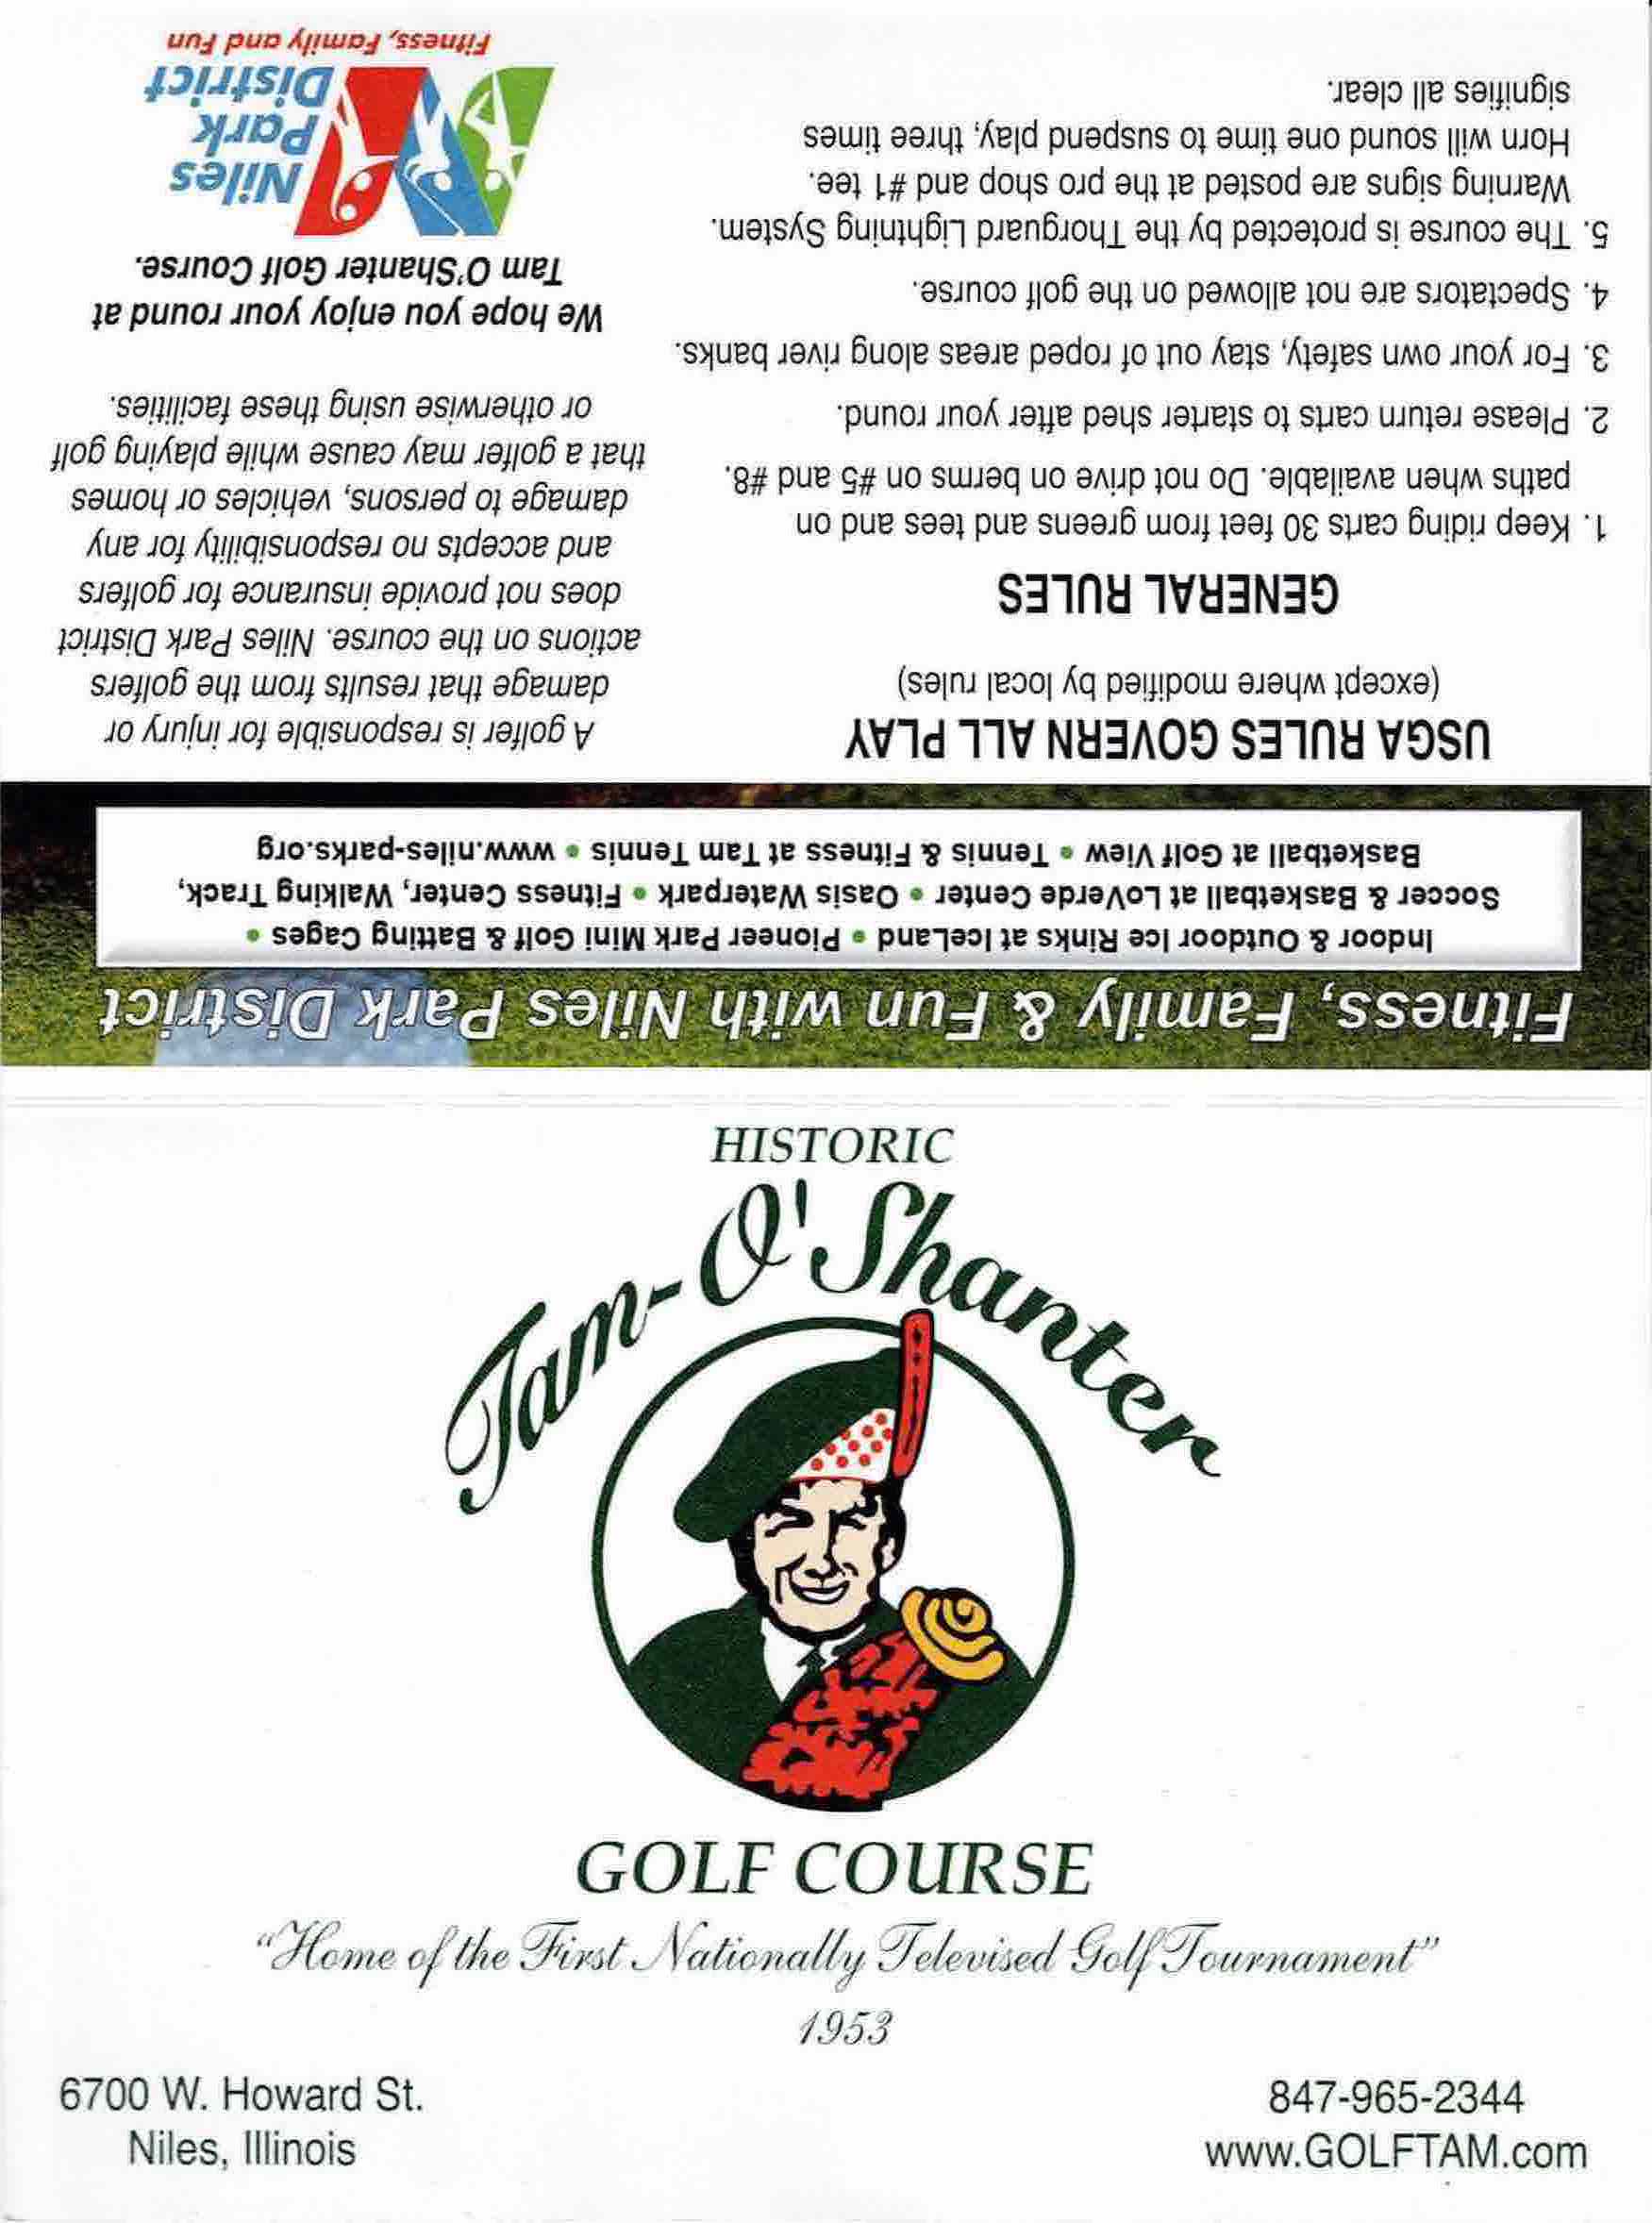 Scan of the scorecard from Tam O'Shanter Golf Course in Niles, Illinois. 